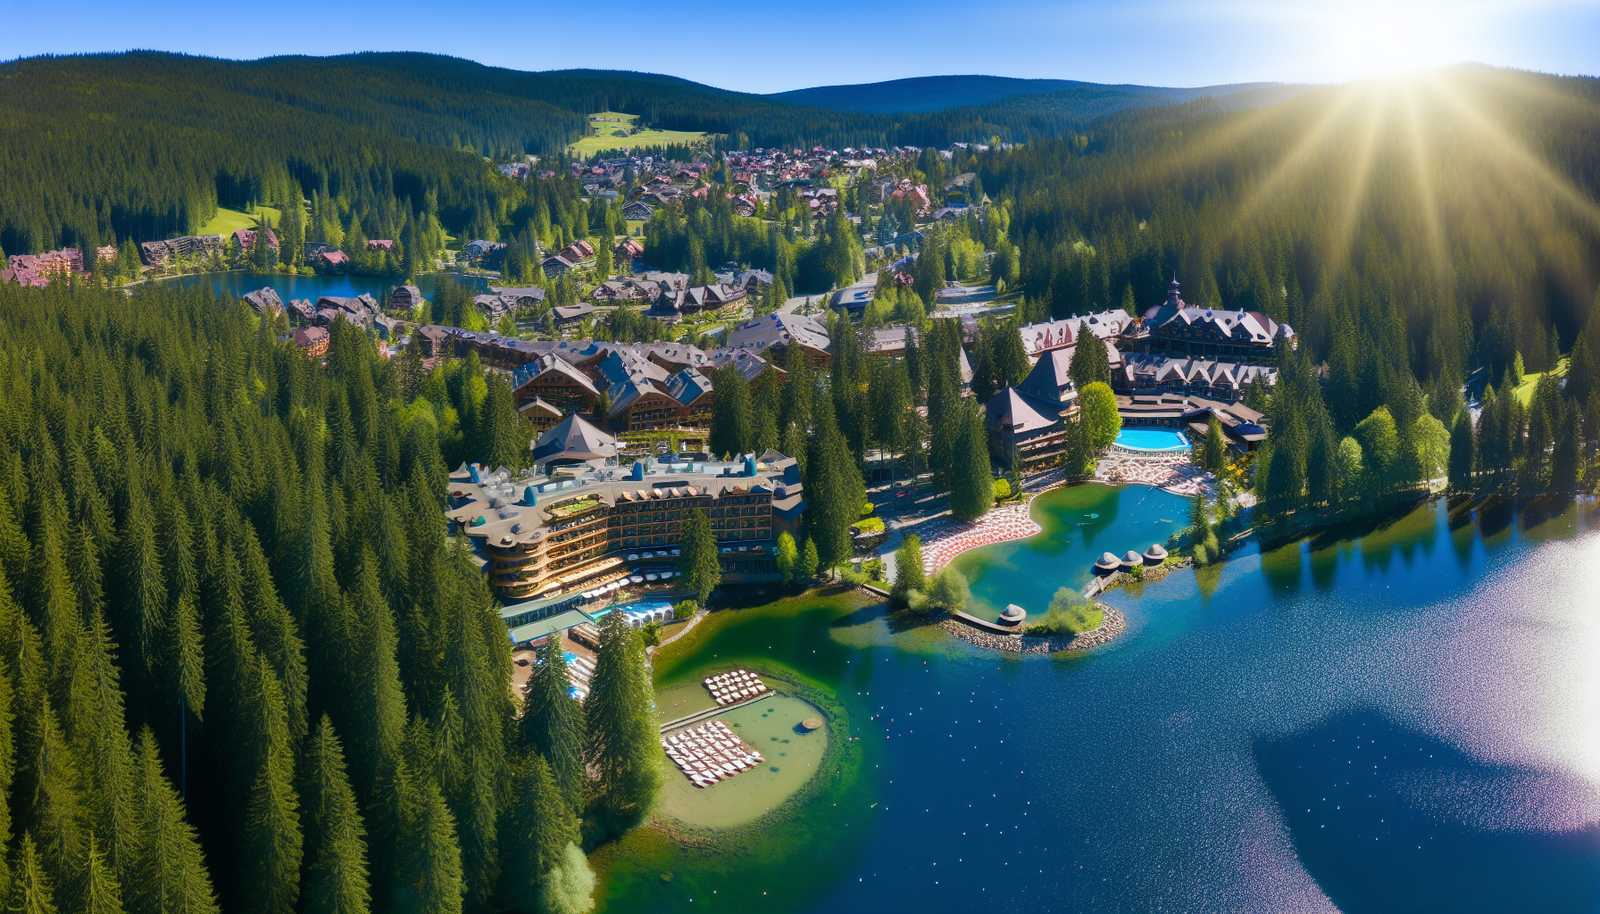 Aerial view of Harrison Hot Springs Resort surrounded by scenic beauty